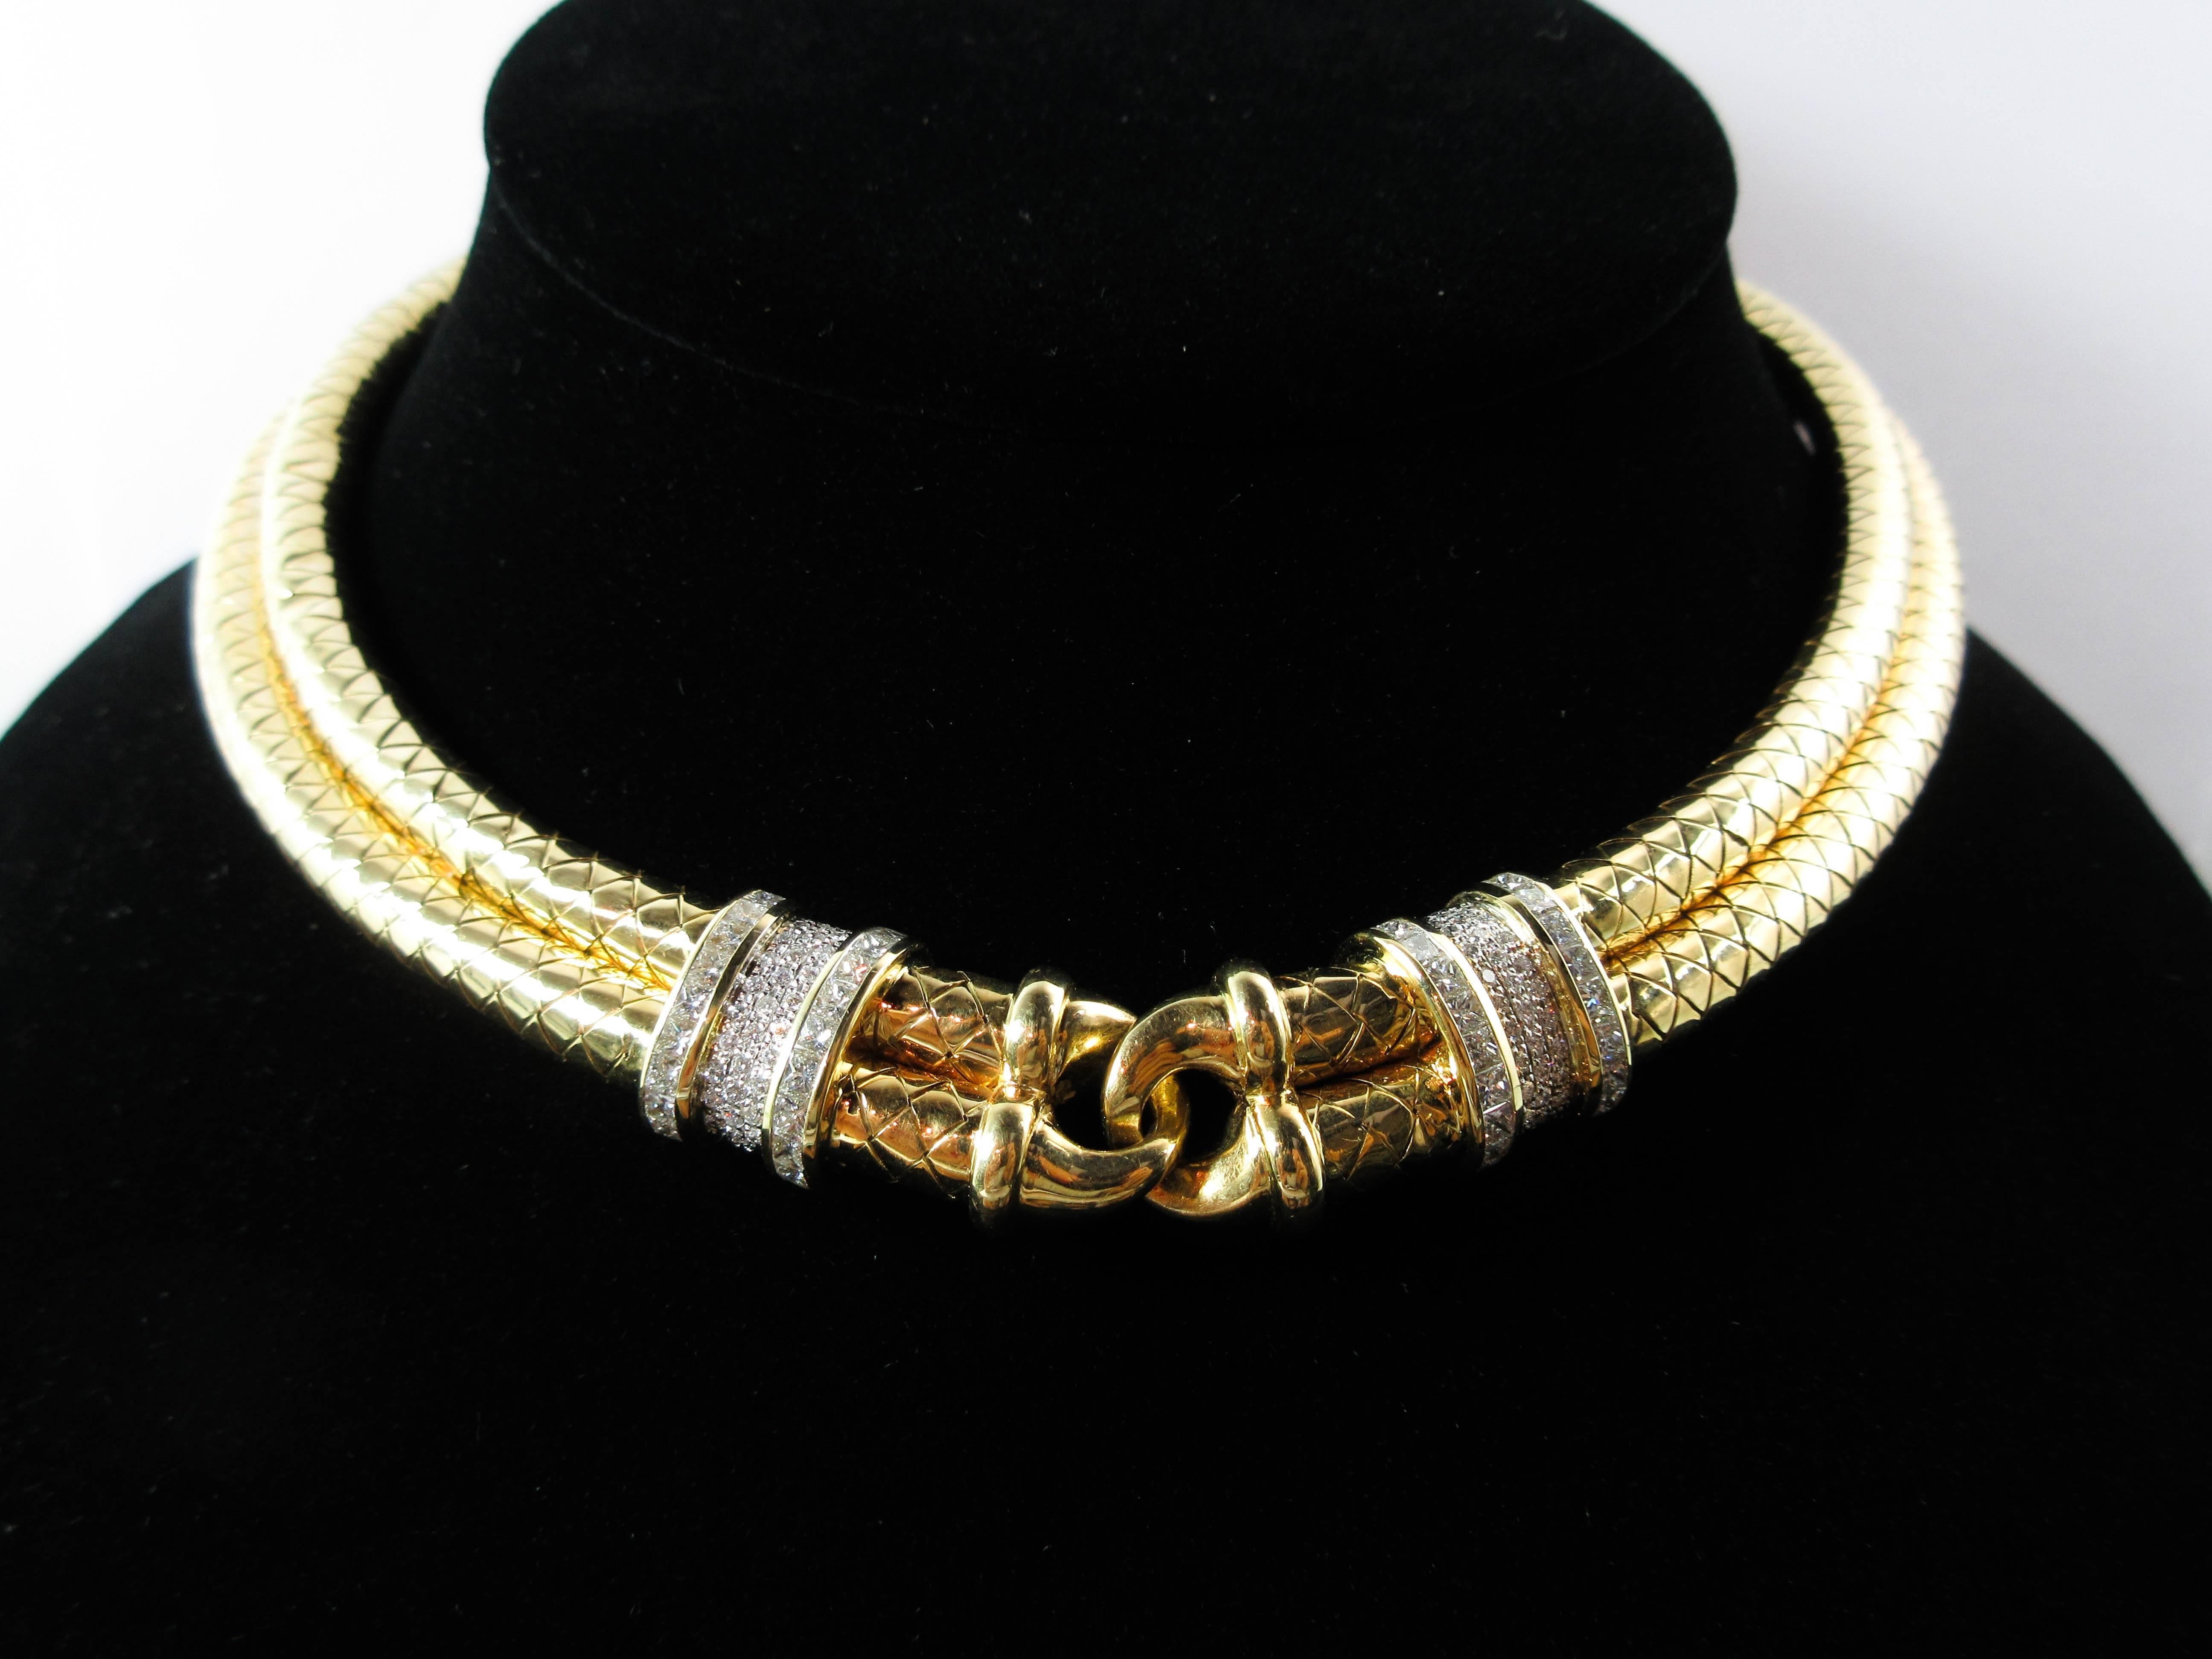 This necklace is composed of 18KT yellow gold with diamond accents. Features a stunning column design. In excellent condition.

Please feel free to ask any questions you may have, we are happy to assist. 

Specs:
18KT Yellow Gold
Approximately 5.01